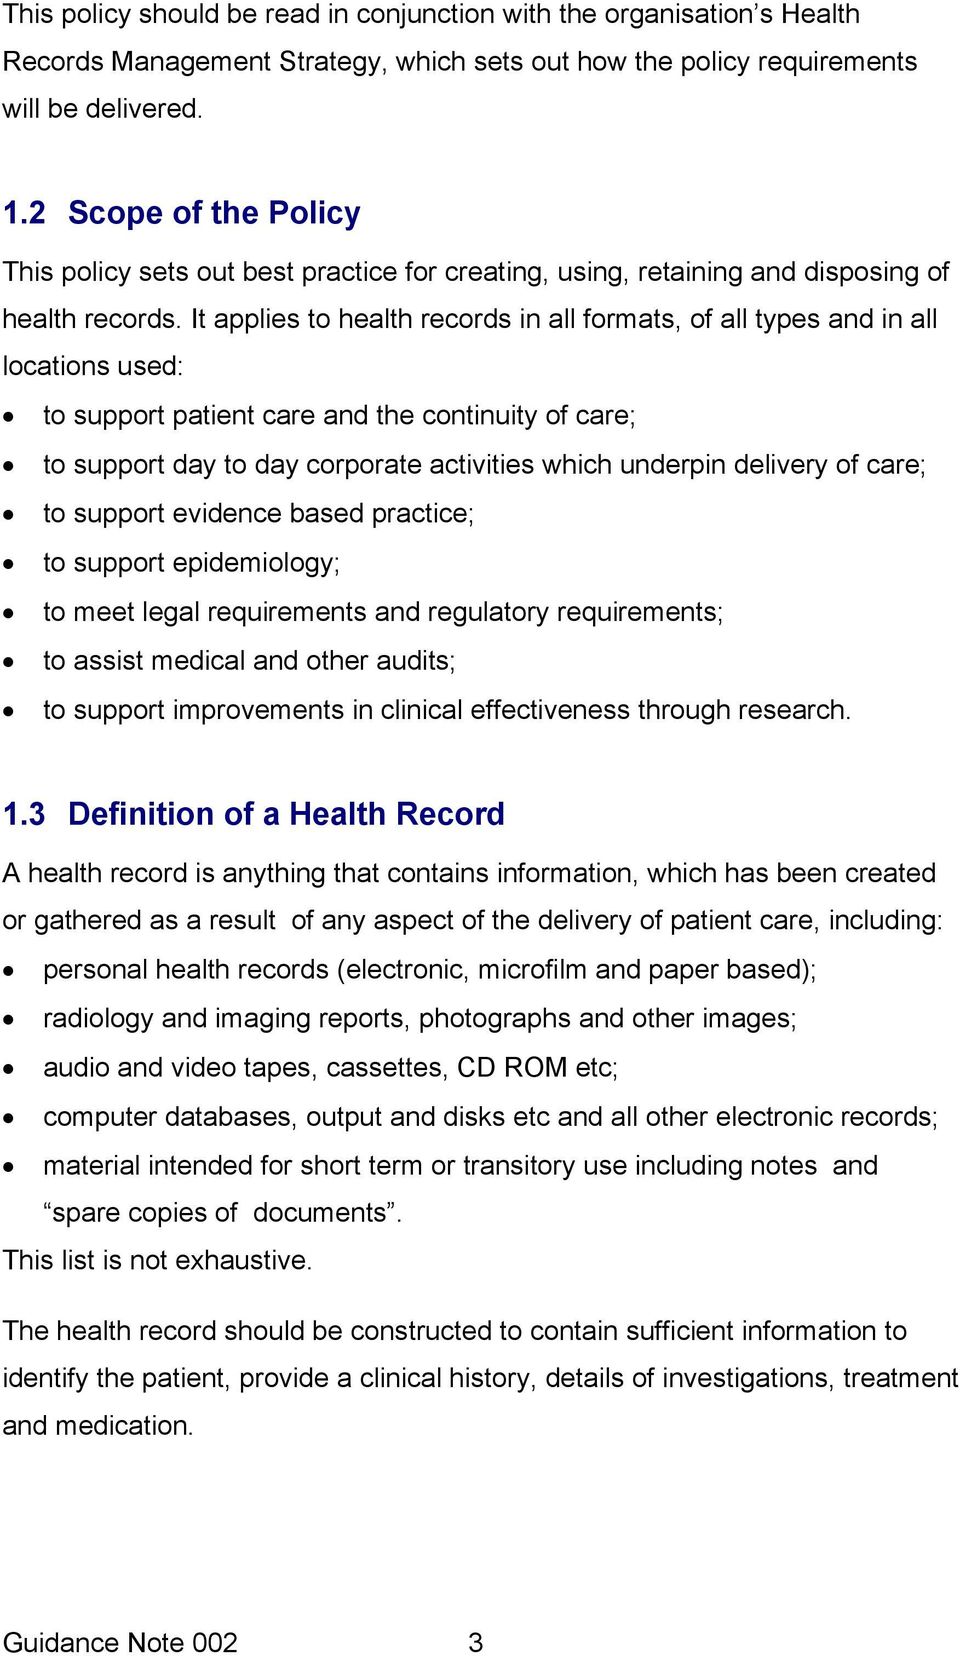 It applies to health records in all formats, of all types and in all locations used: to support patient care and the continuity of care; to support day to day corporate activities which underpin